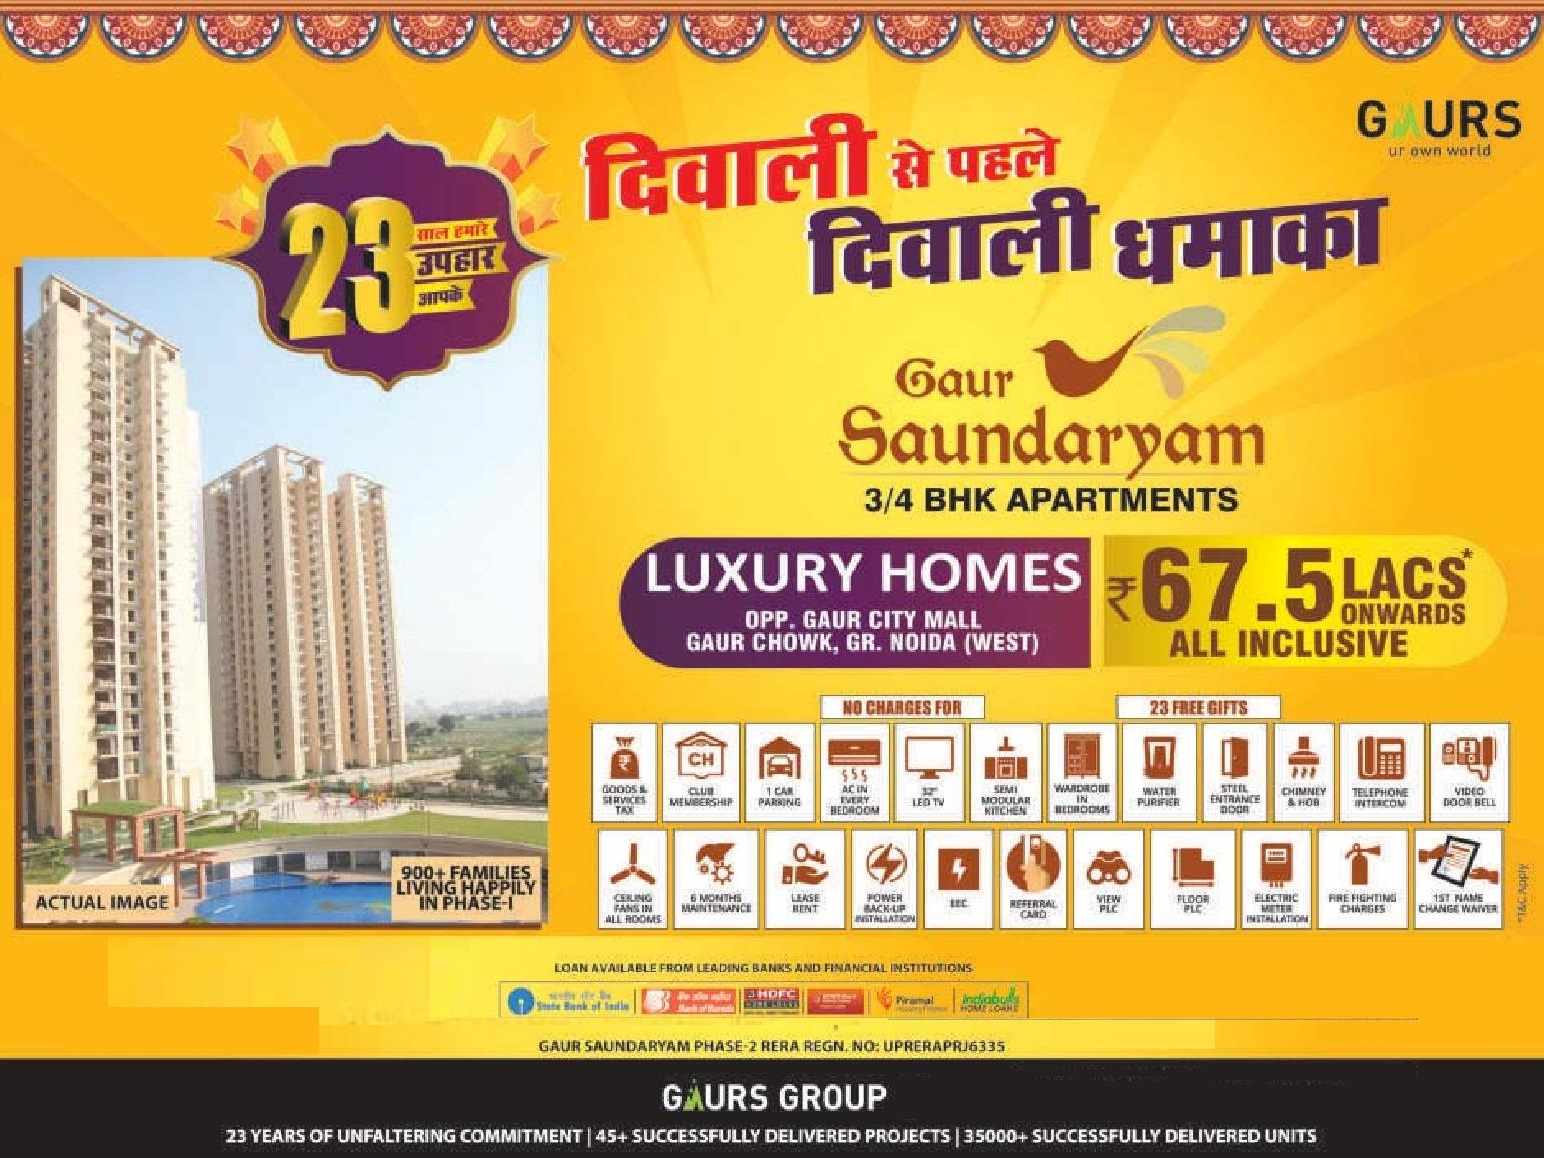 Book luxury homes starting @ Rs. 67.5 Lacs at Gaur Saundaryam in Greater Noida